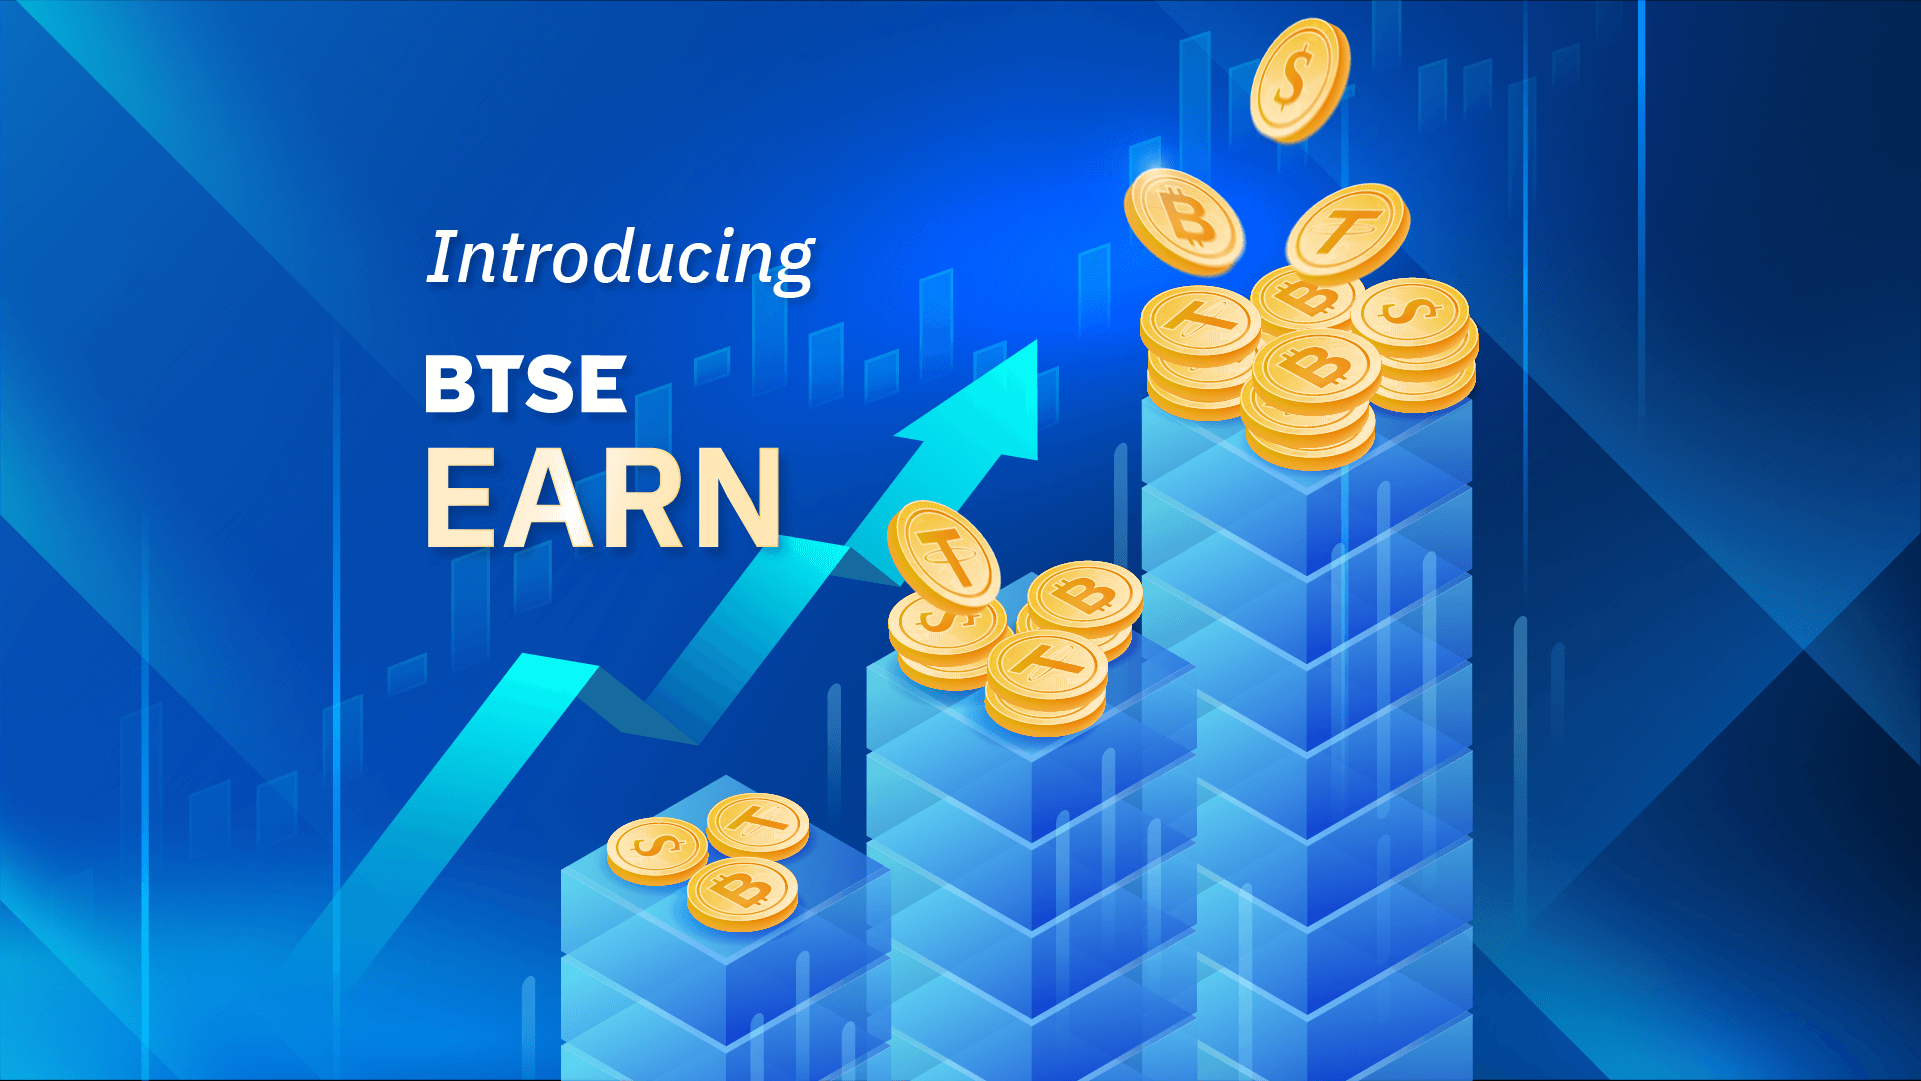 BTSE Introduces Earn Feature for Crypto Assets